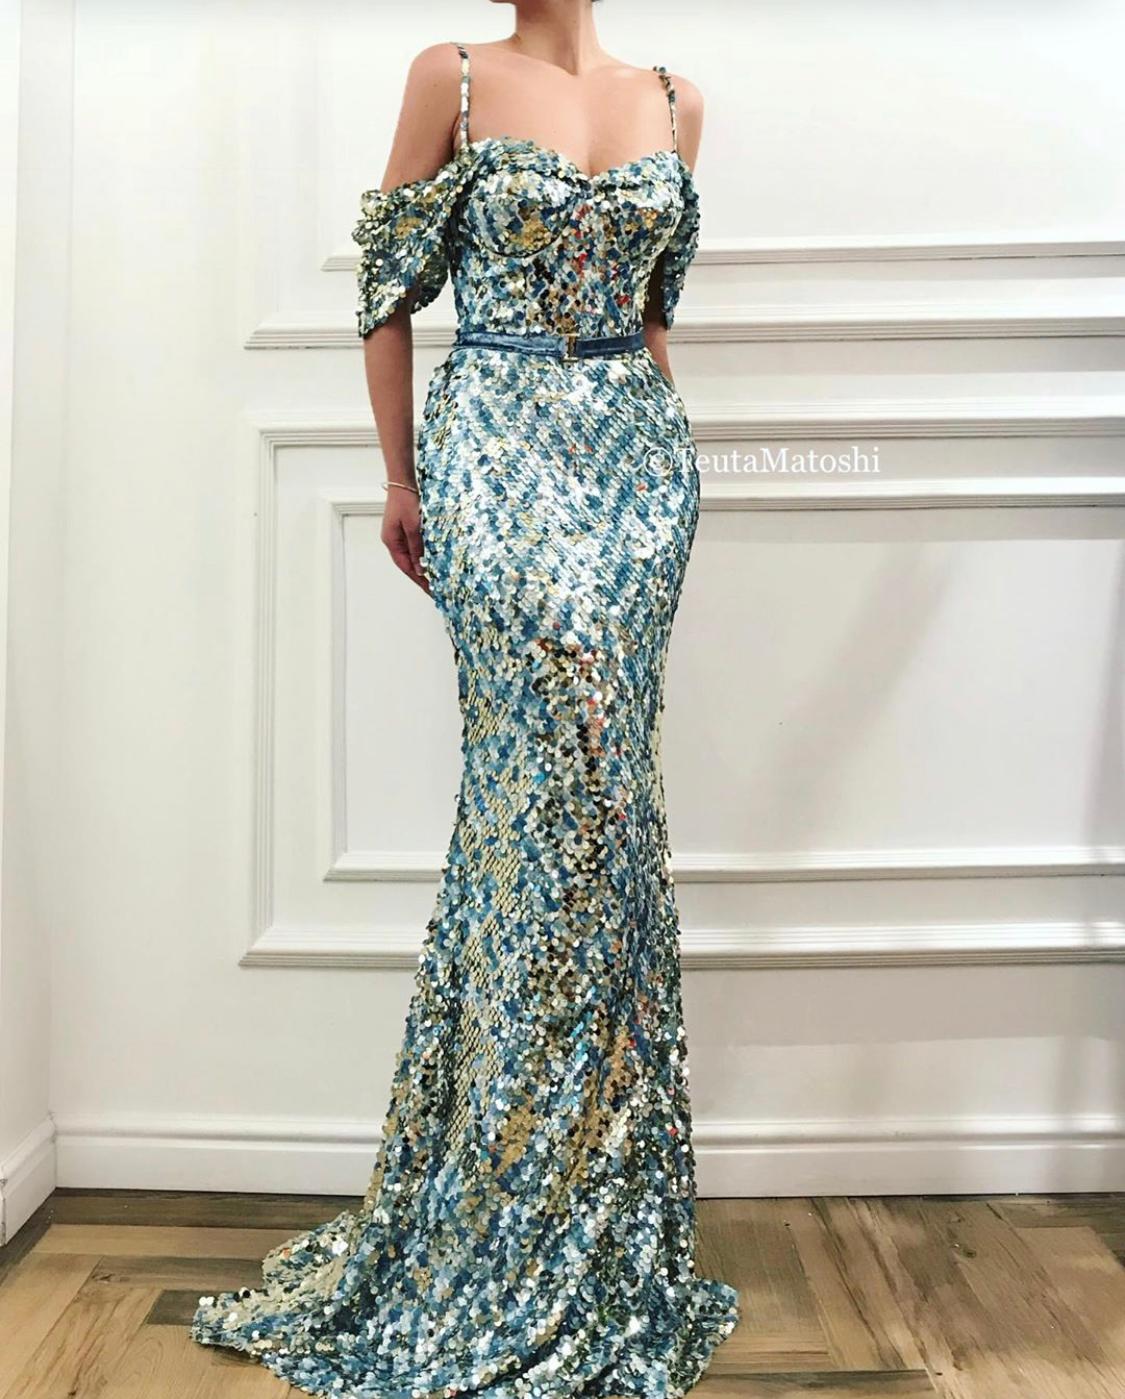 Blue mermaid dress with spaghetti straps, off the shoulder sleeves and sequins